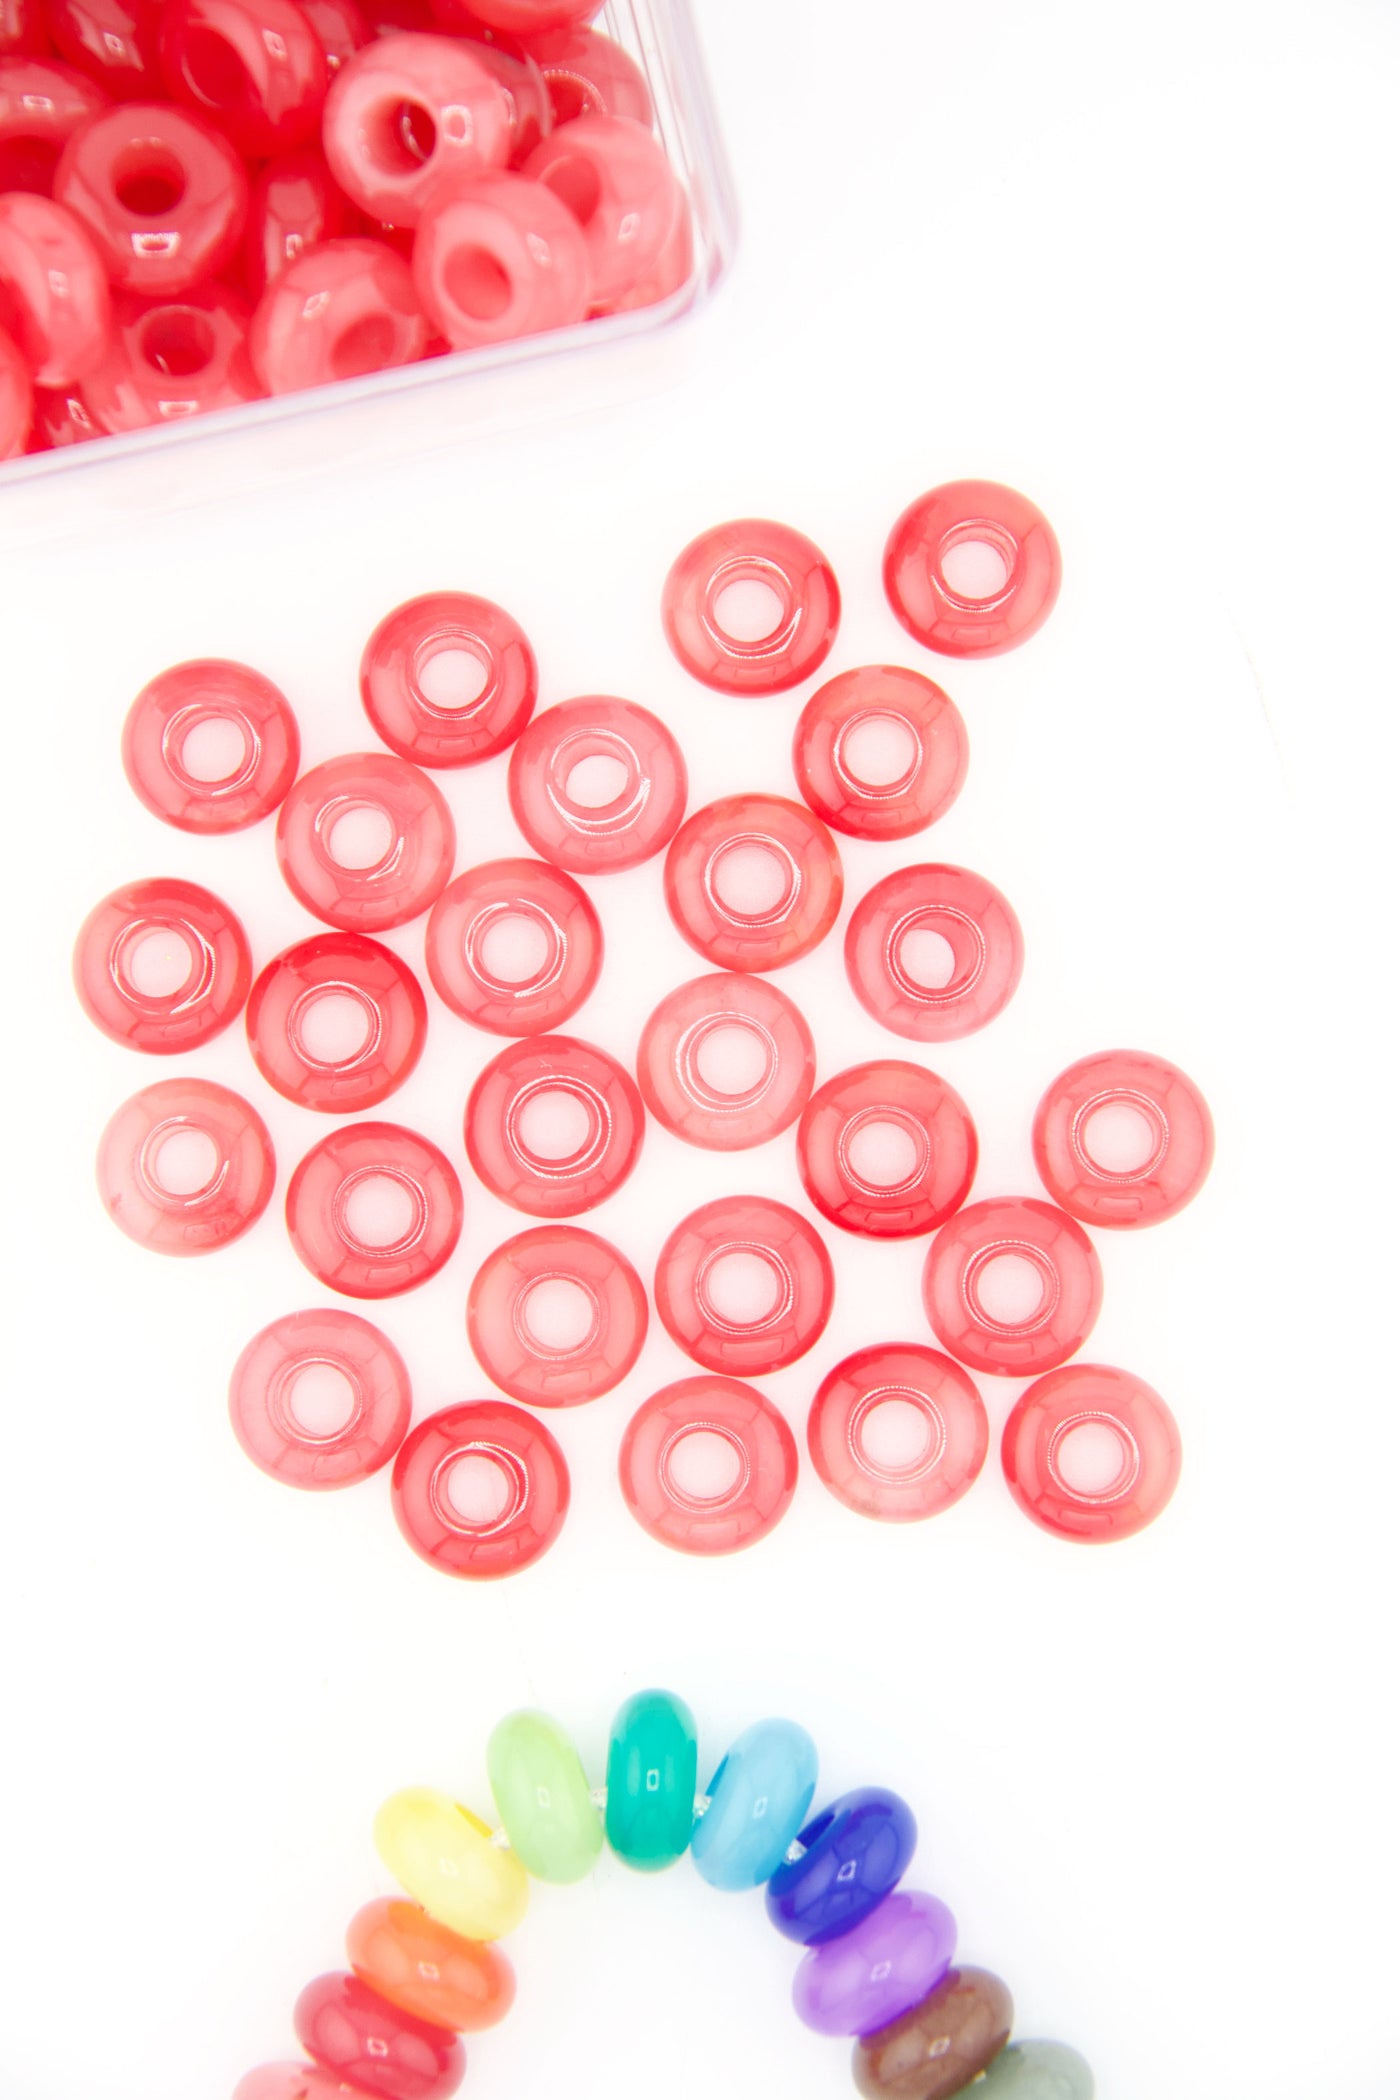 Red Candy Jade Large Hole Euro Beads, Slider Beads, 15mm, 5mm Hole